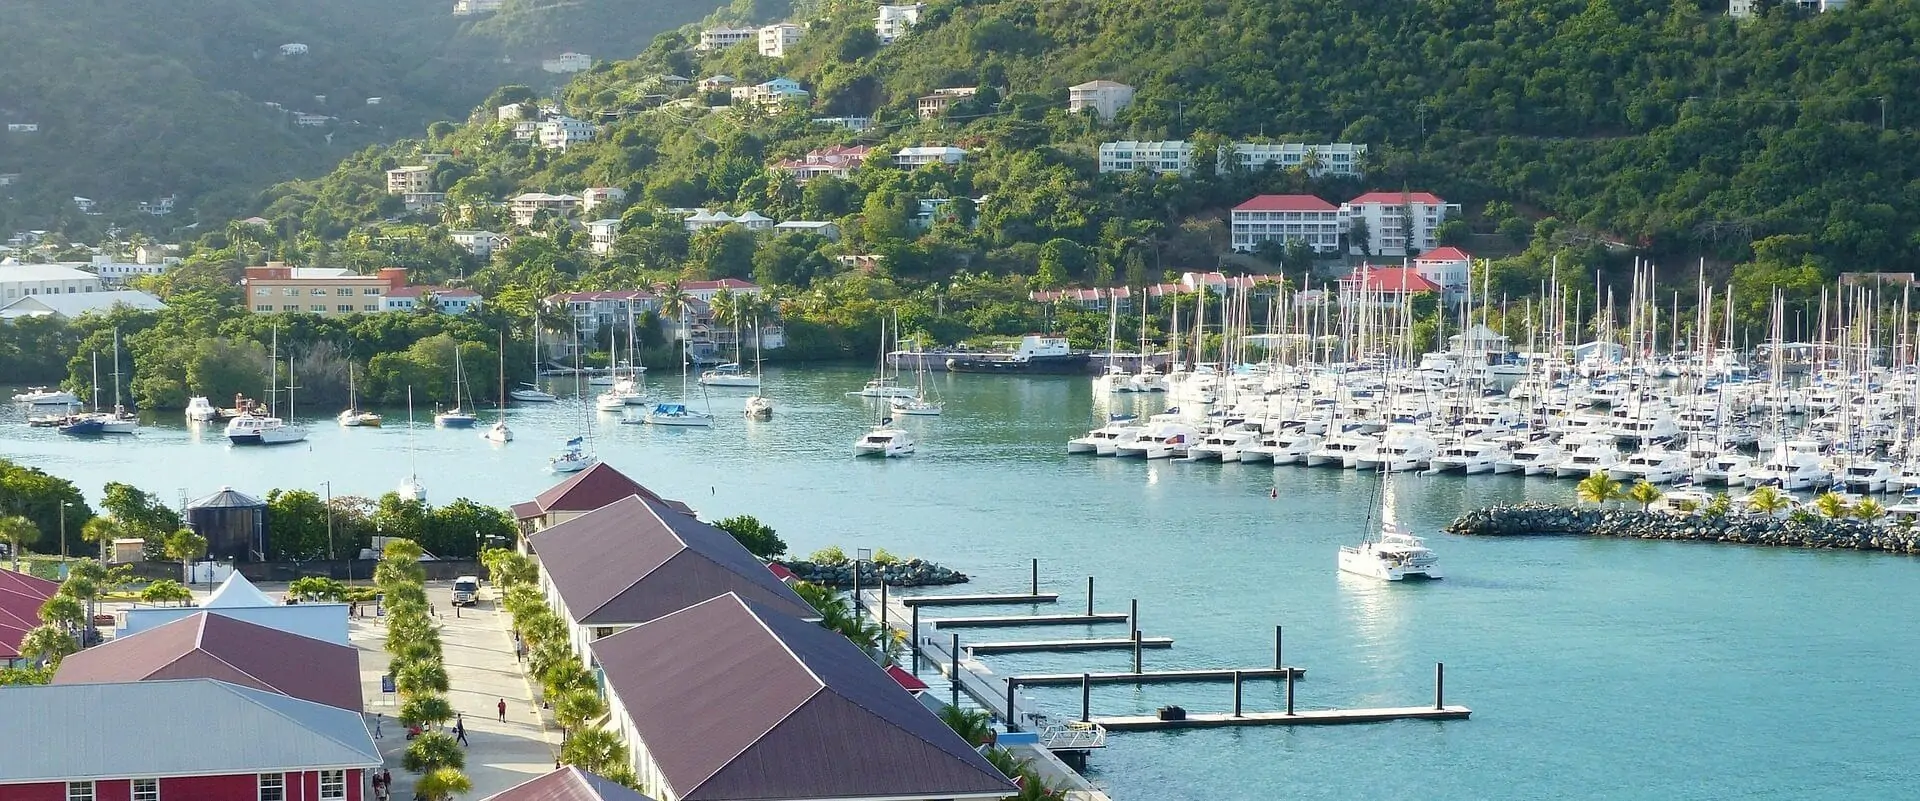 Rent a yacht in the British Virgin Islands